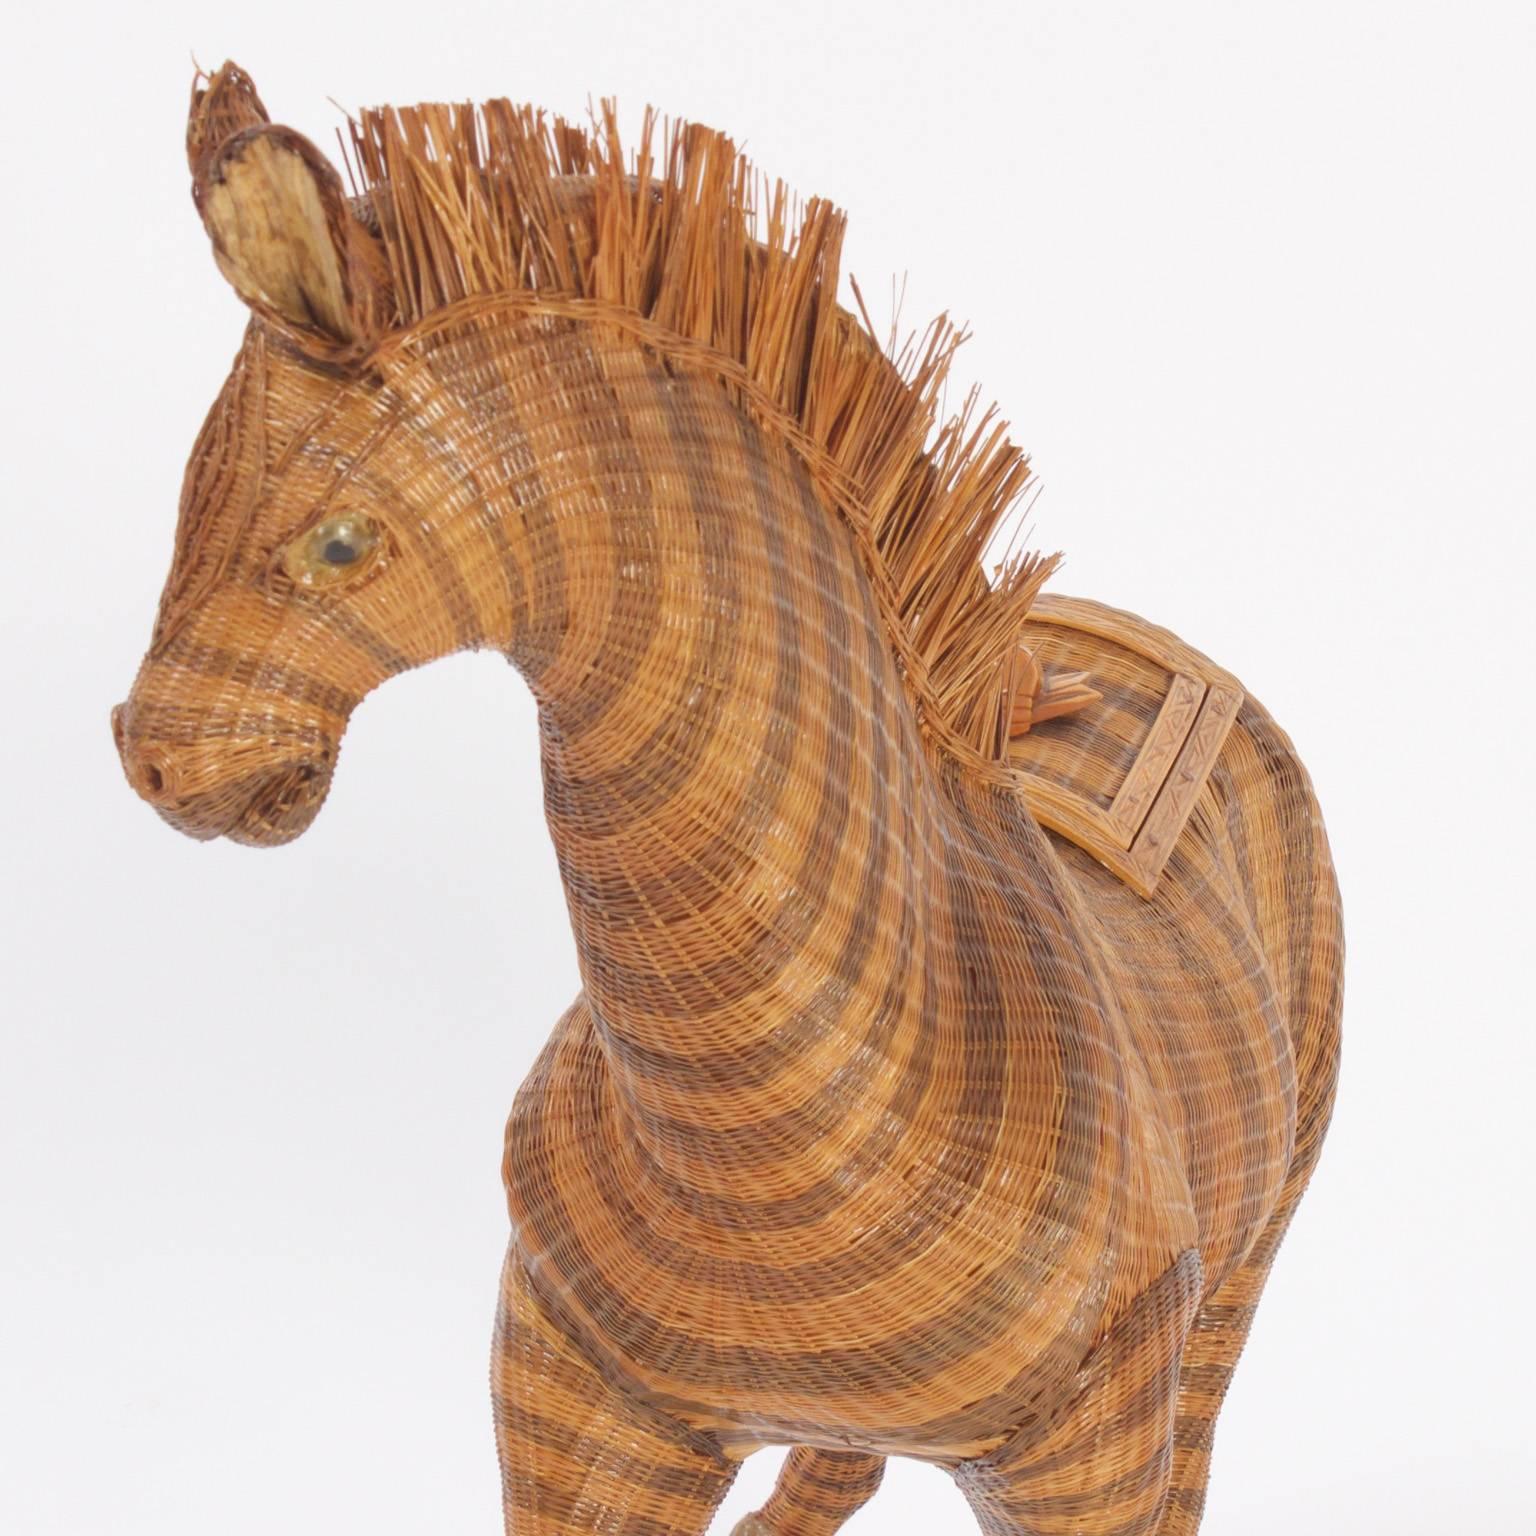 Charming wicker zebra with an intricate woven construction and life like posture. This zebra functions as a basket or box, having a latch on the back with faux a bamboo handle that open to reveal storage compartments.
 